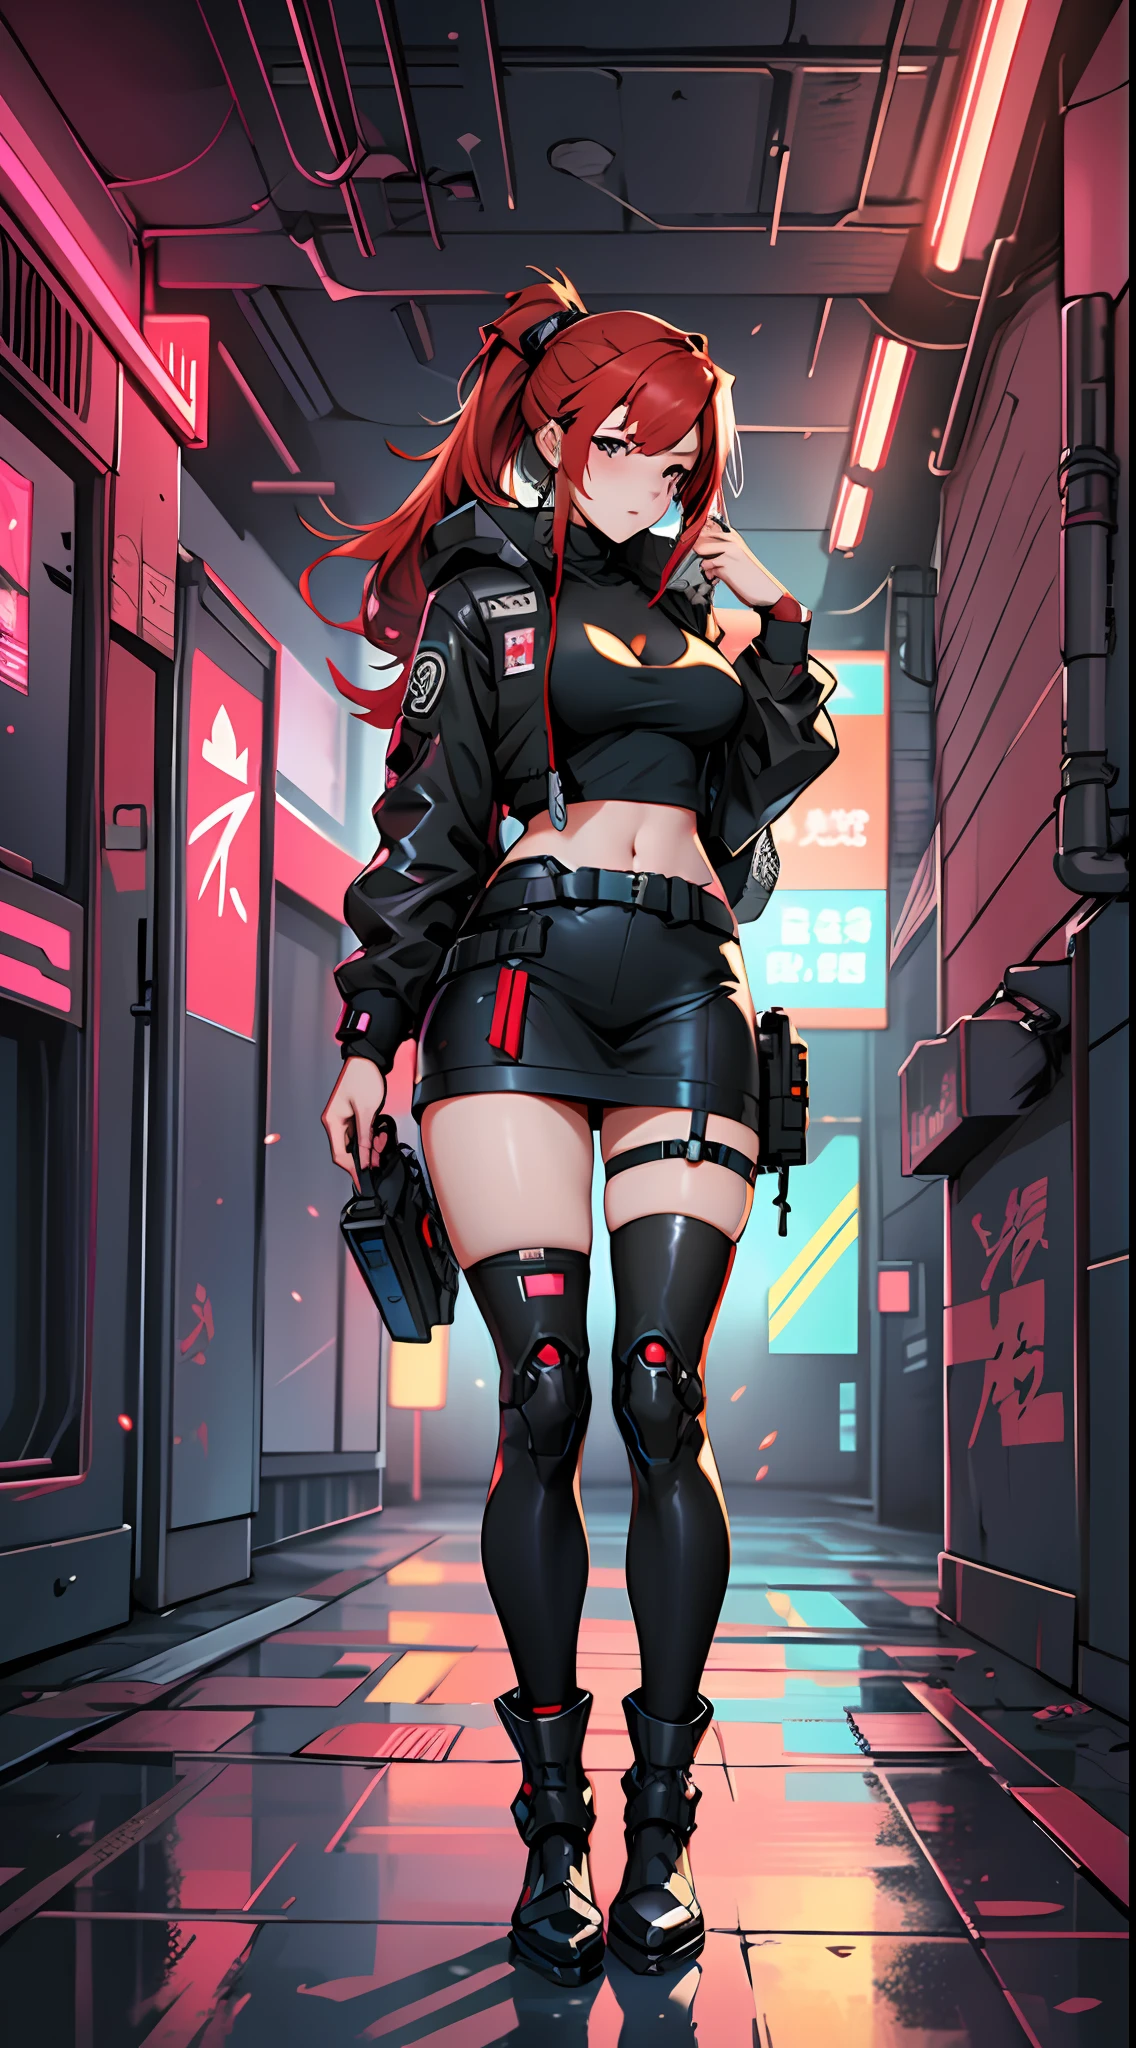 anime girl with red hair and black outfit standing in a room, from girls frontline, redline anime movie style, girls frontline style, Girls Frontline CG, From Arknights, girls frontline universe, cyberpunk anime girl, female cyberpunk anime girl, Fine details. Girl front, Girl front, cyberpunk anime girl mech, Kantai collection style, digital cyberpunk anime art